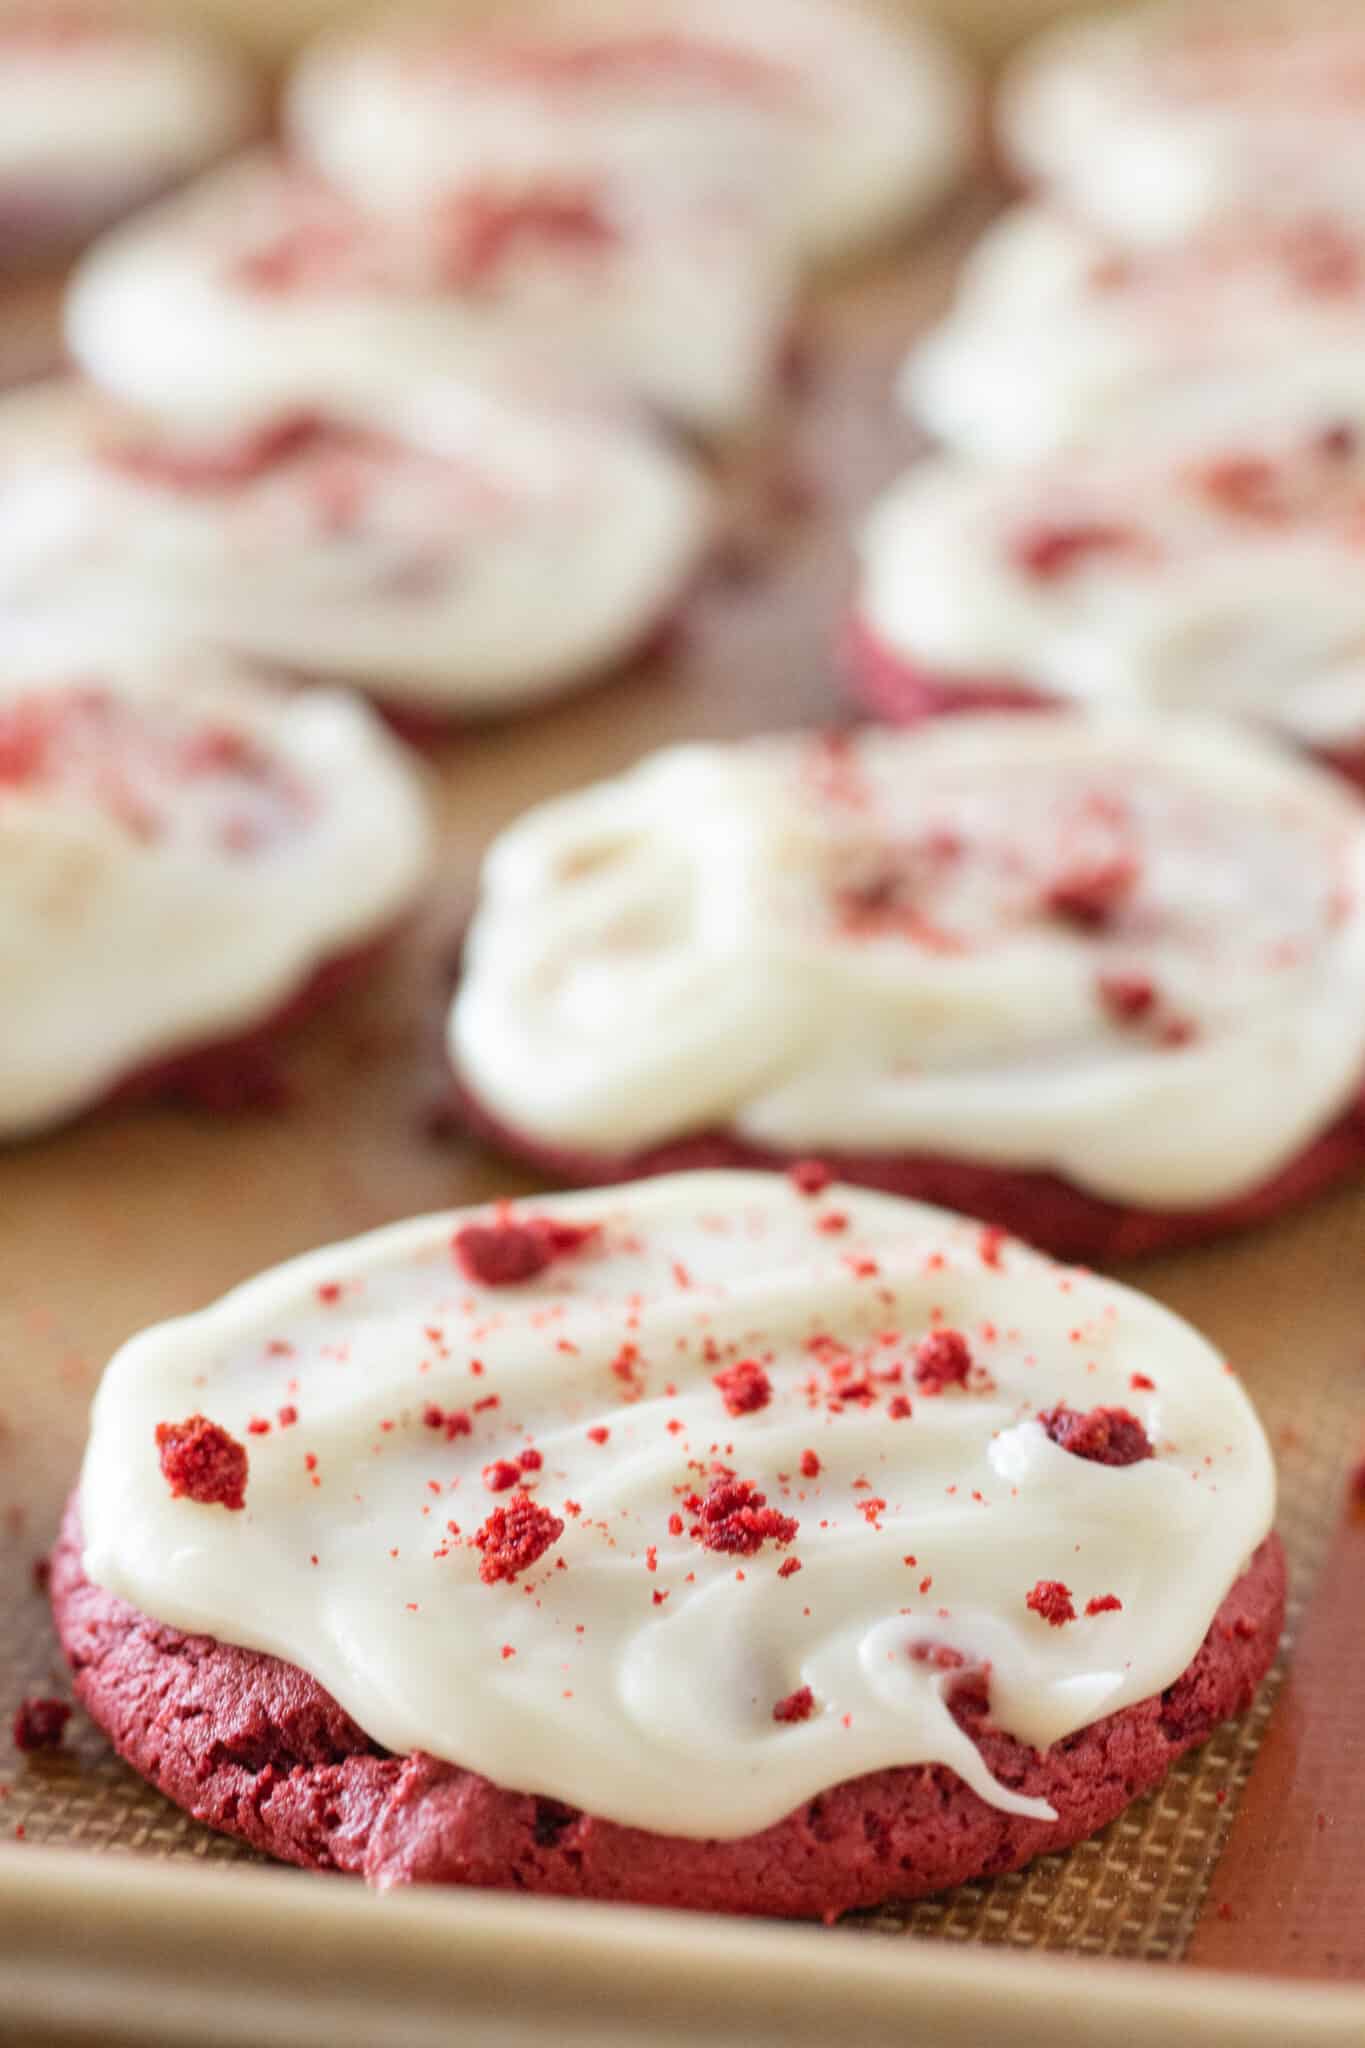 Red Velvet Sheet Cake Cookies Recipe with a Cake Mix by top US cookies blogger, Practically Homemade